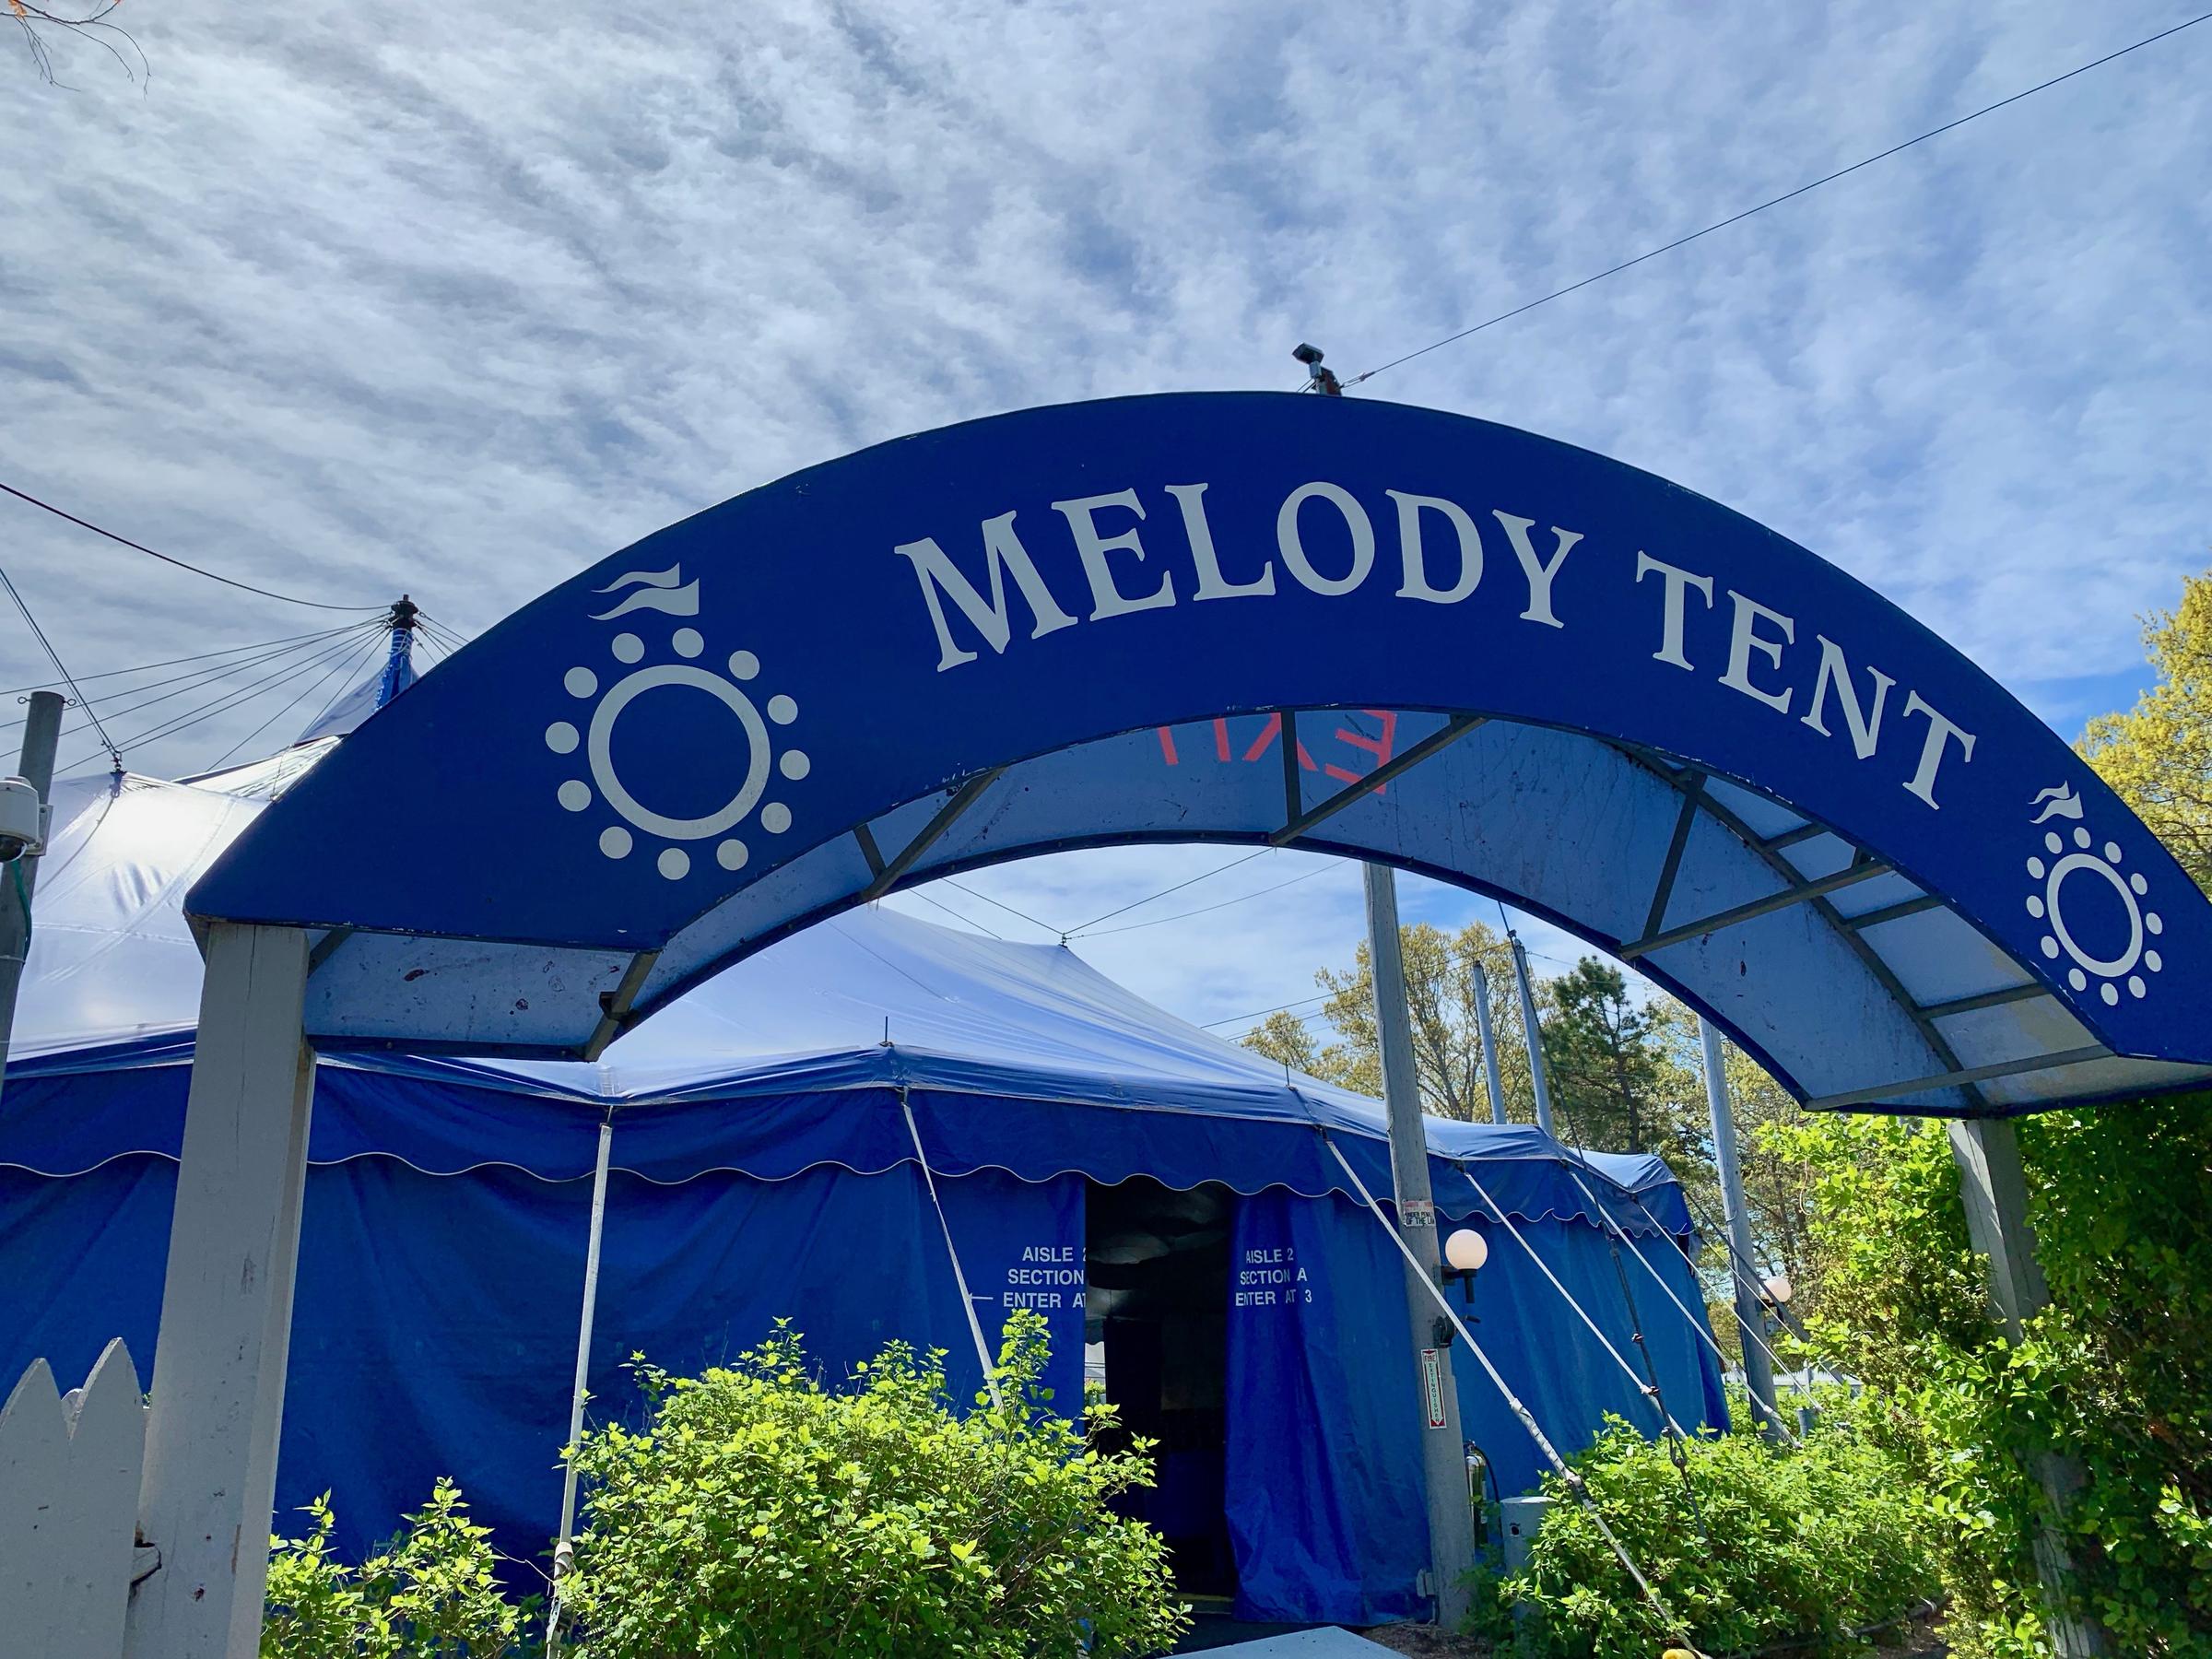 Hyannis Melody Tent Seating Chart